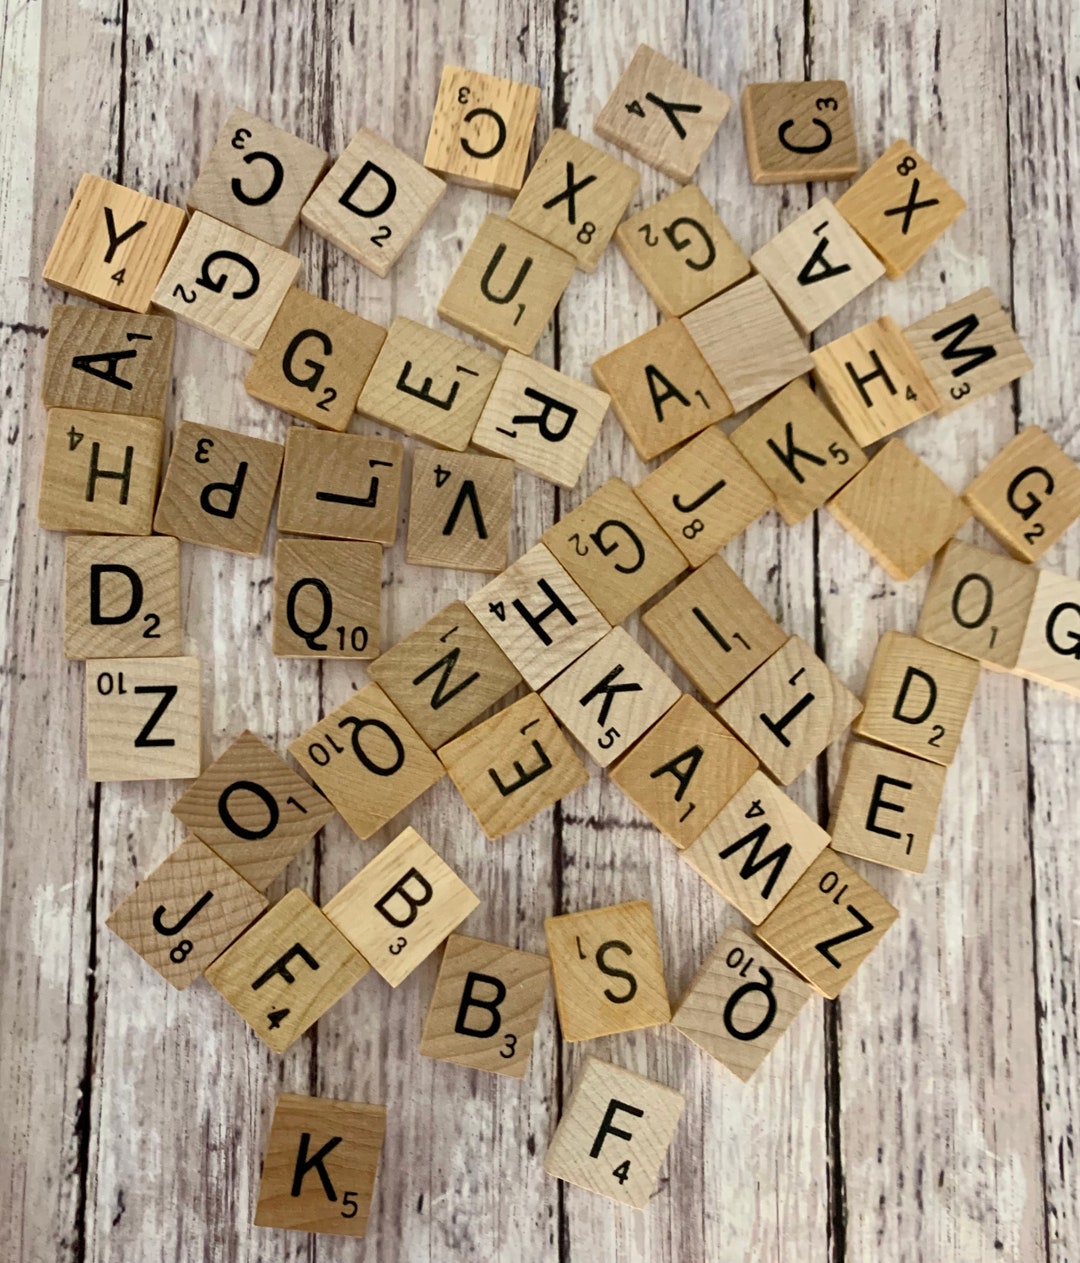 Scrabble Letters for Arts and Crafts 25p for 20mm standard Scrabble Size  50p Each for 50mm Each and 1 Pound for 100mm -  Israel